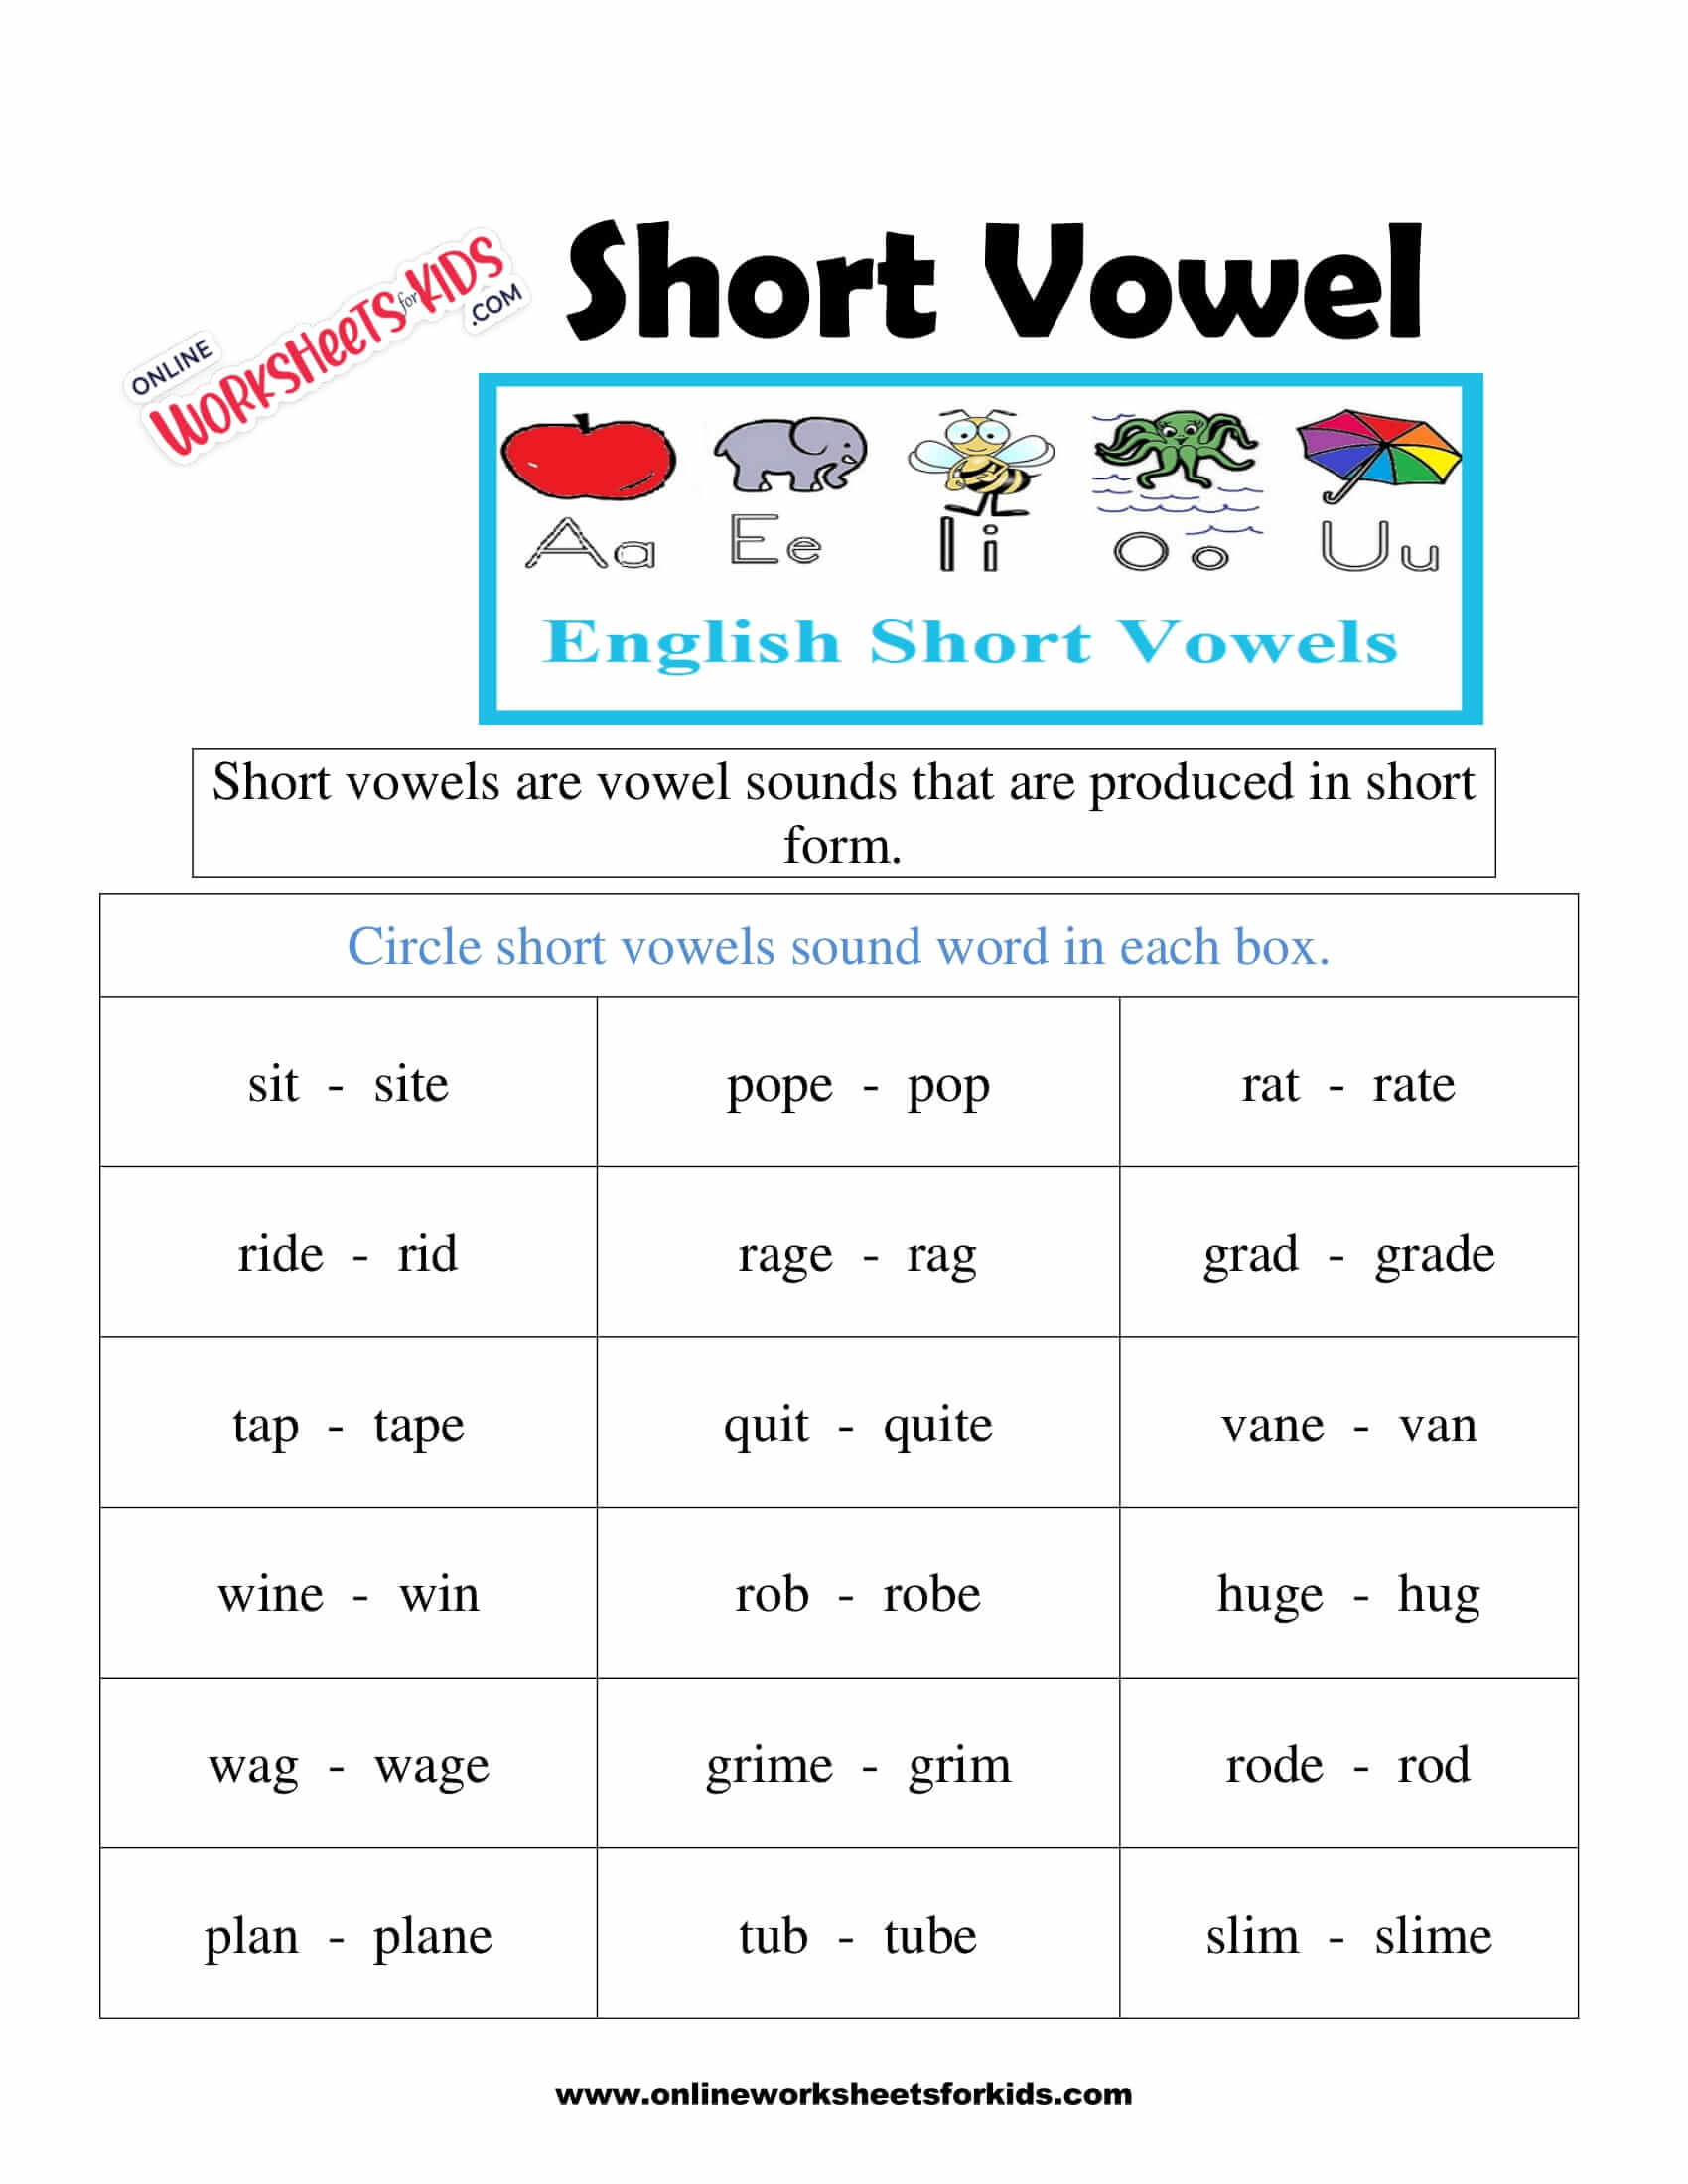 short-vowels-story-jan-and-ted